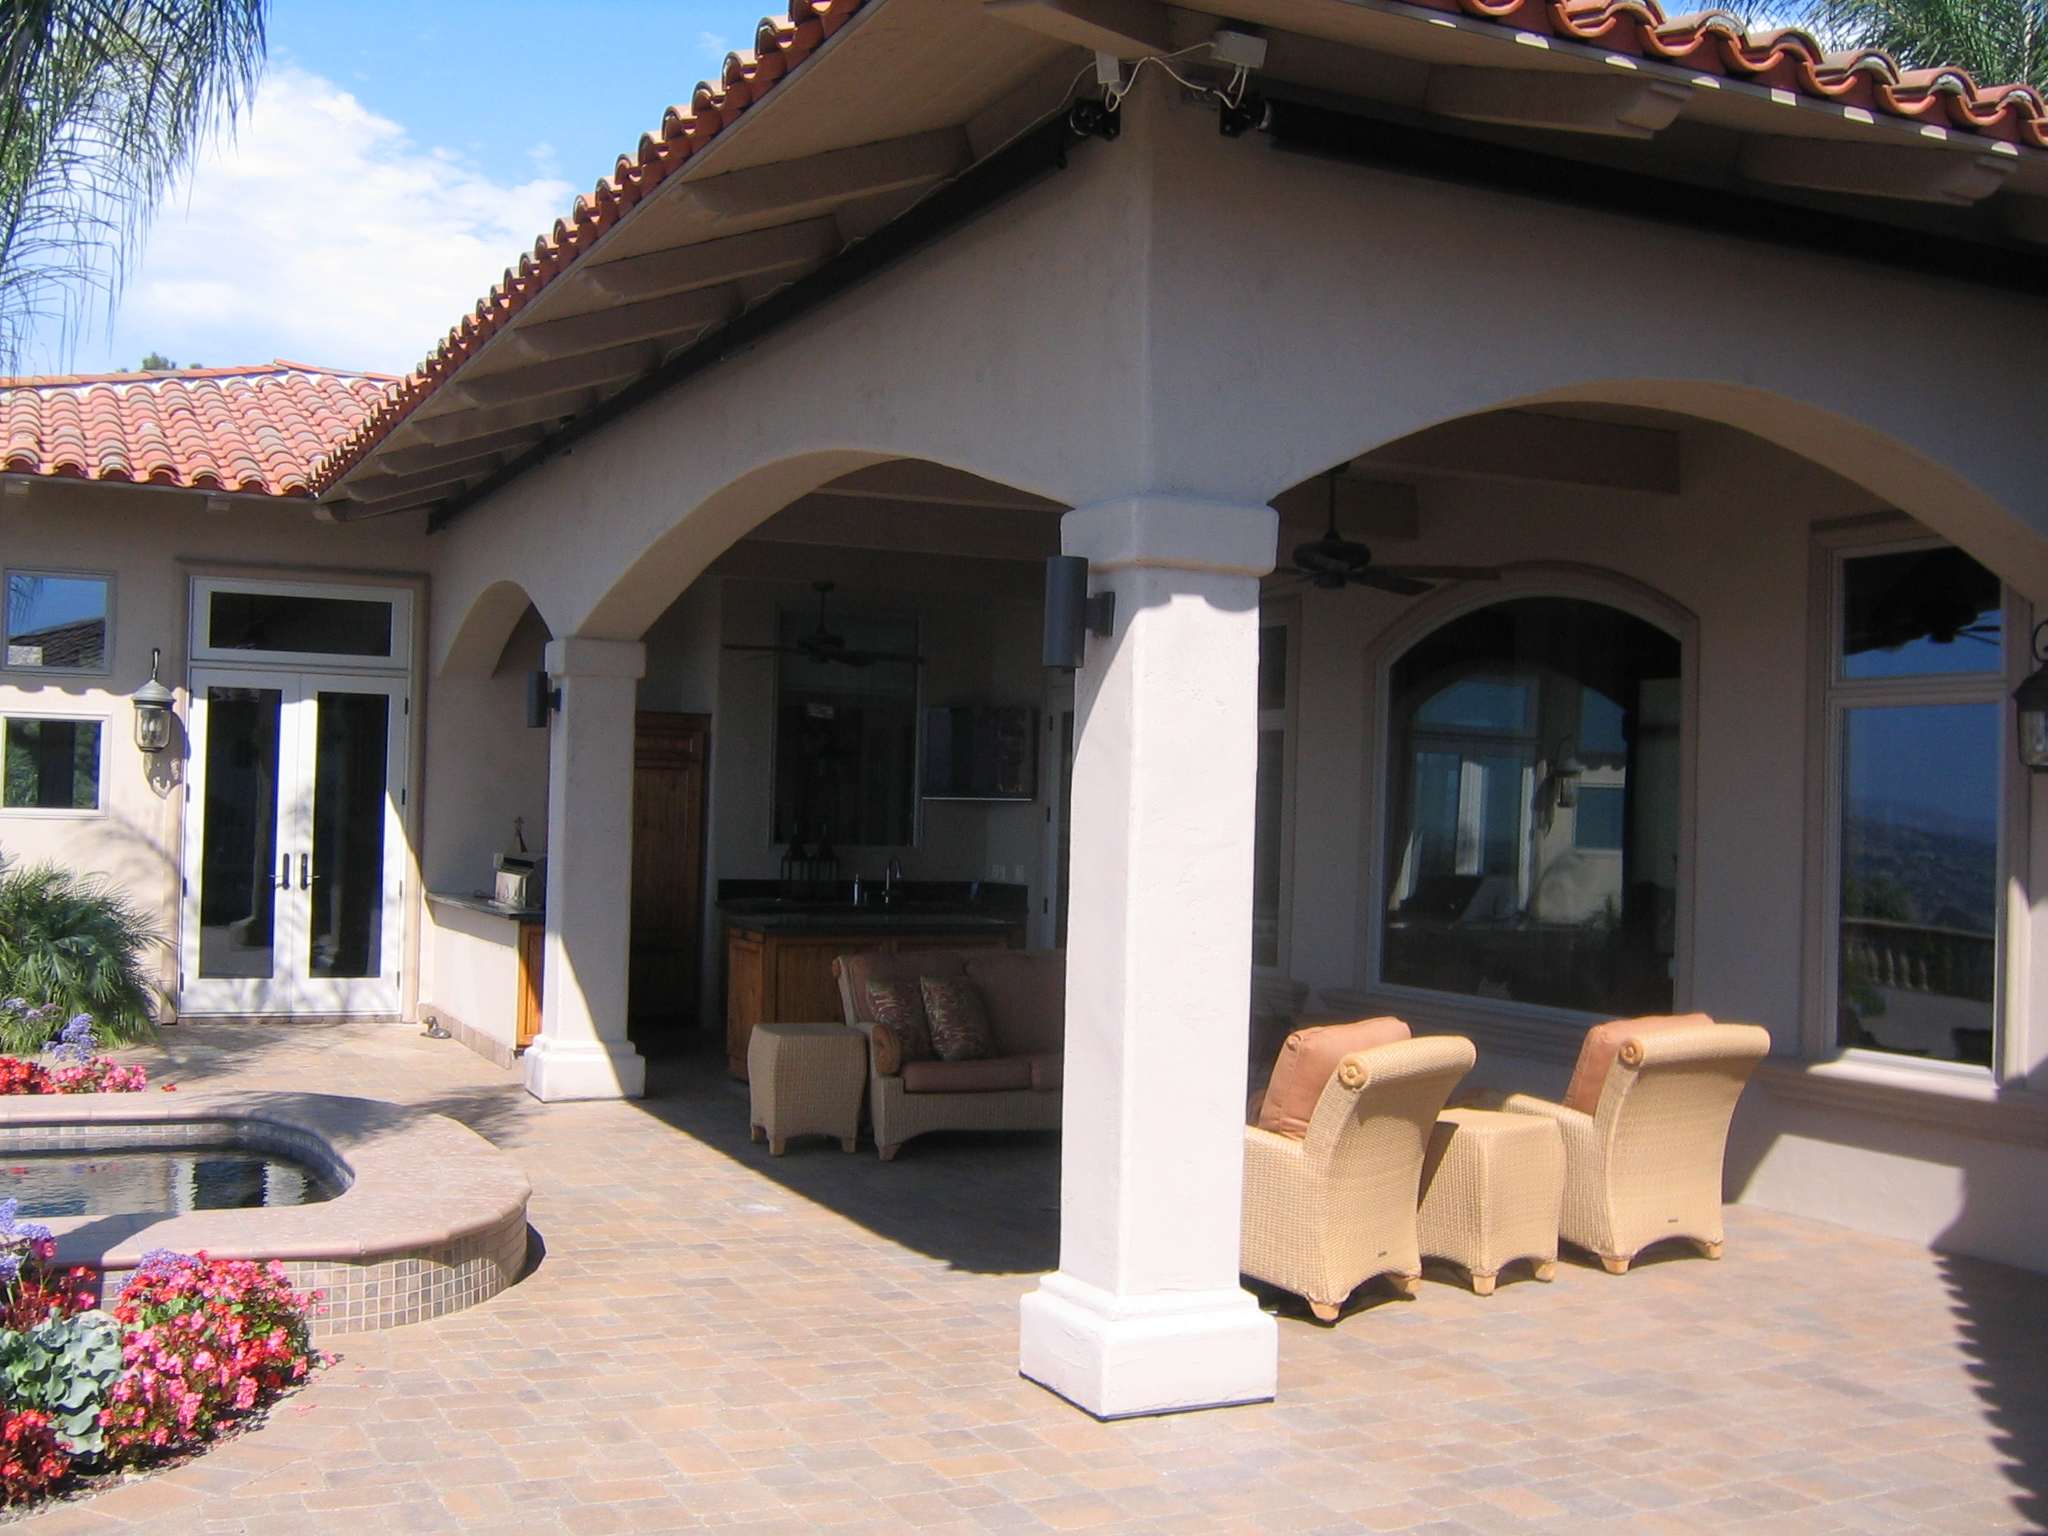 Porch Roller Curtain Services in San Diego, CA